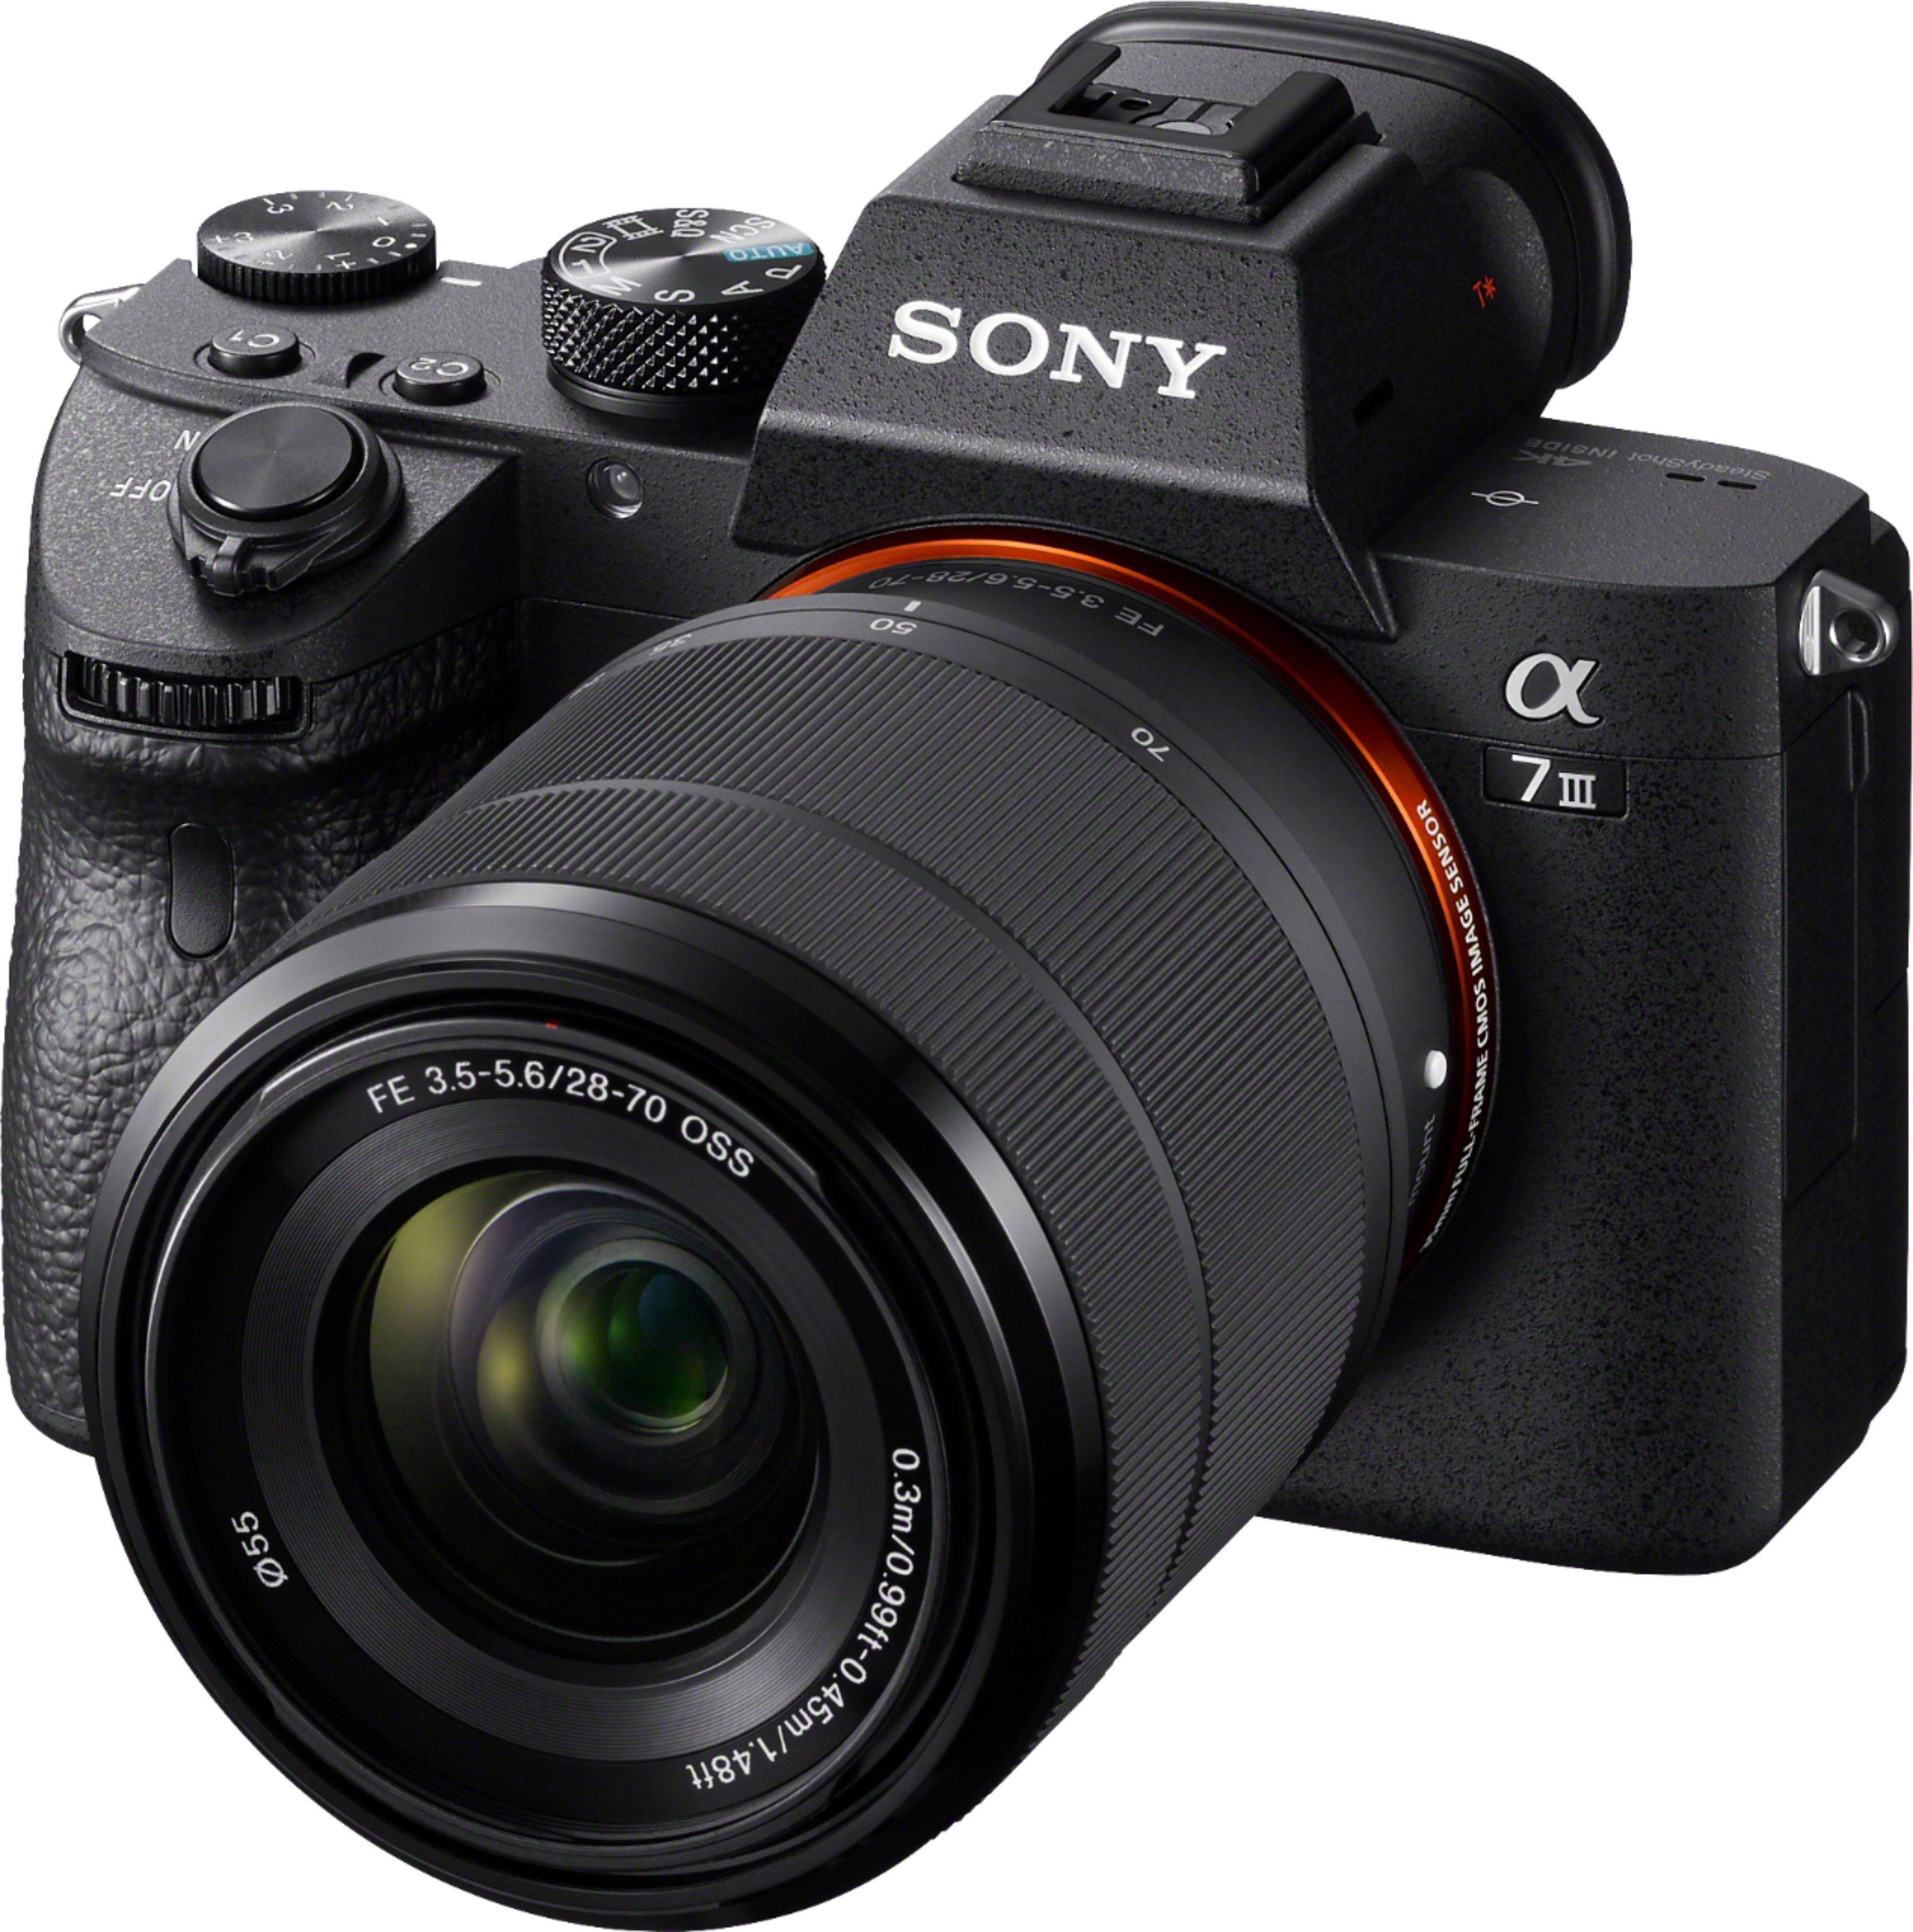 Sony Alpha a7 III Mirrorless [Video] Camera with FE 28-70 mm F3.5-5.6 OSS  Lens Black ILCE7M3K/B - Best Buy